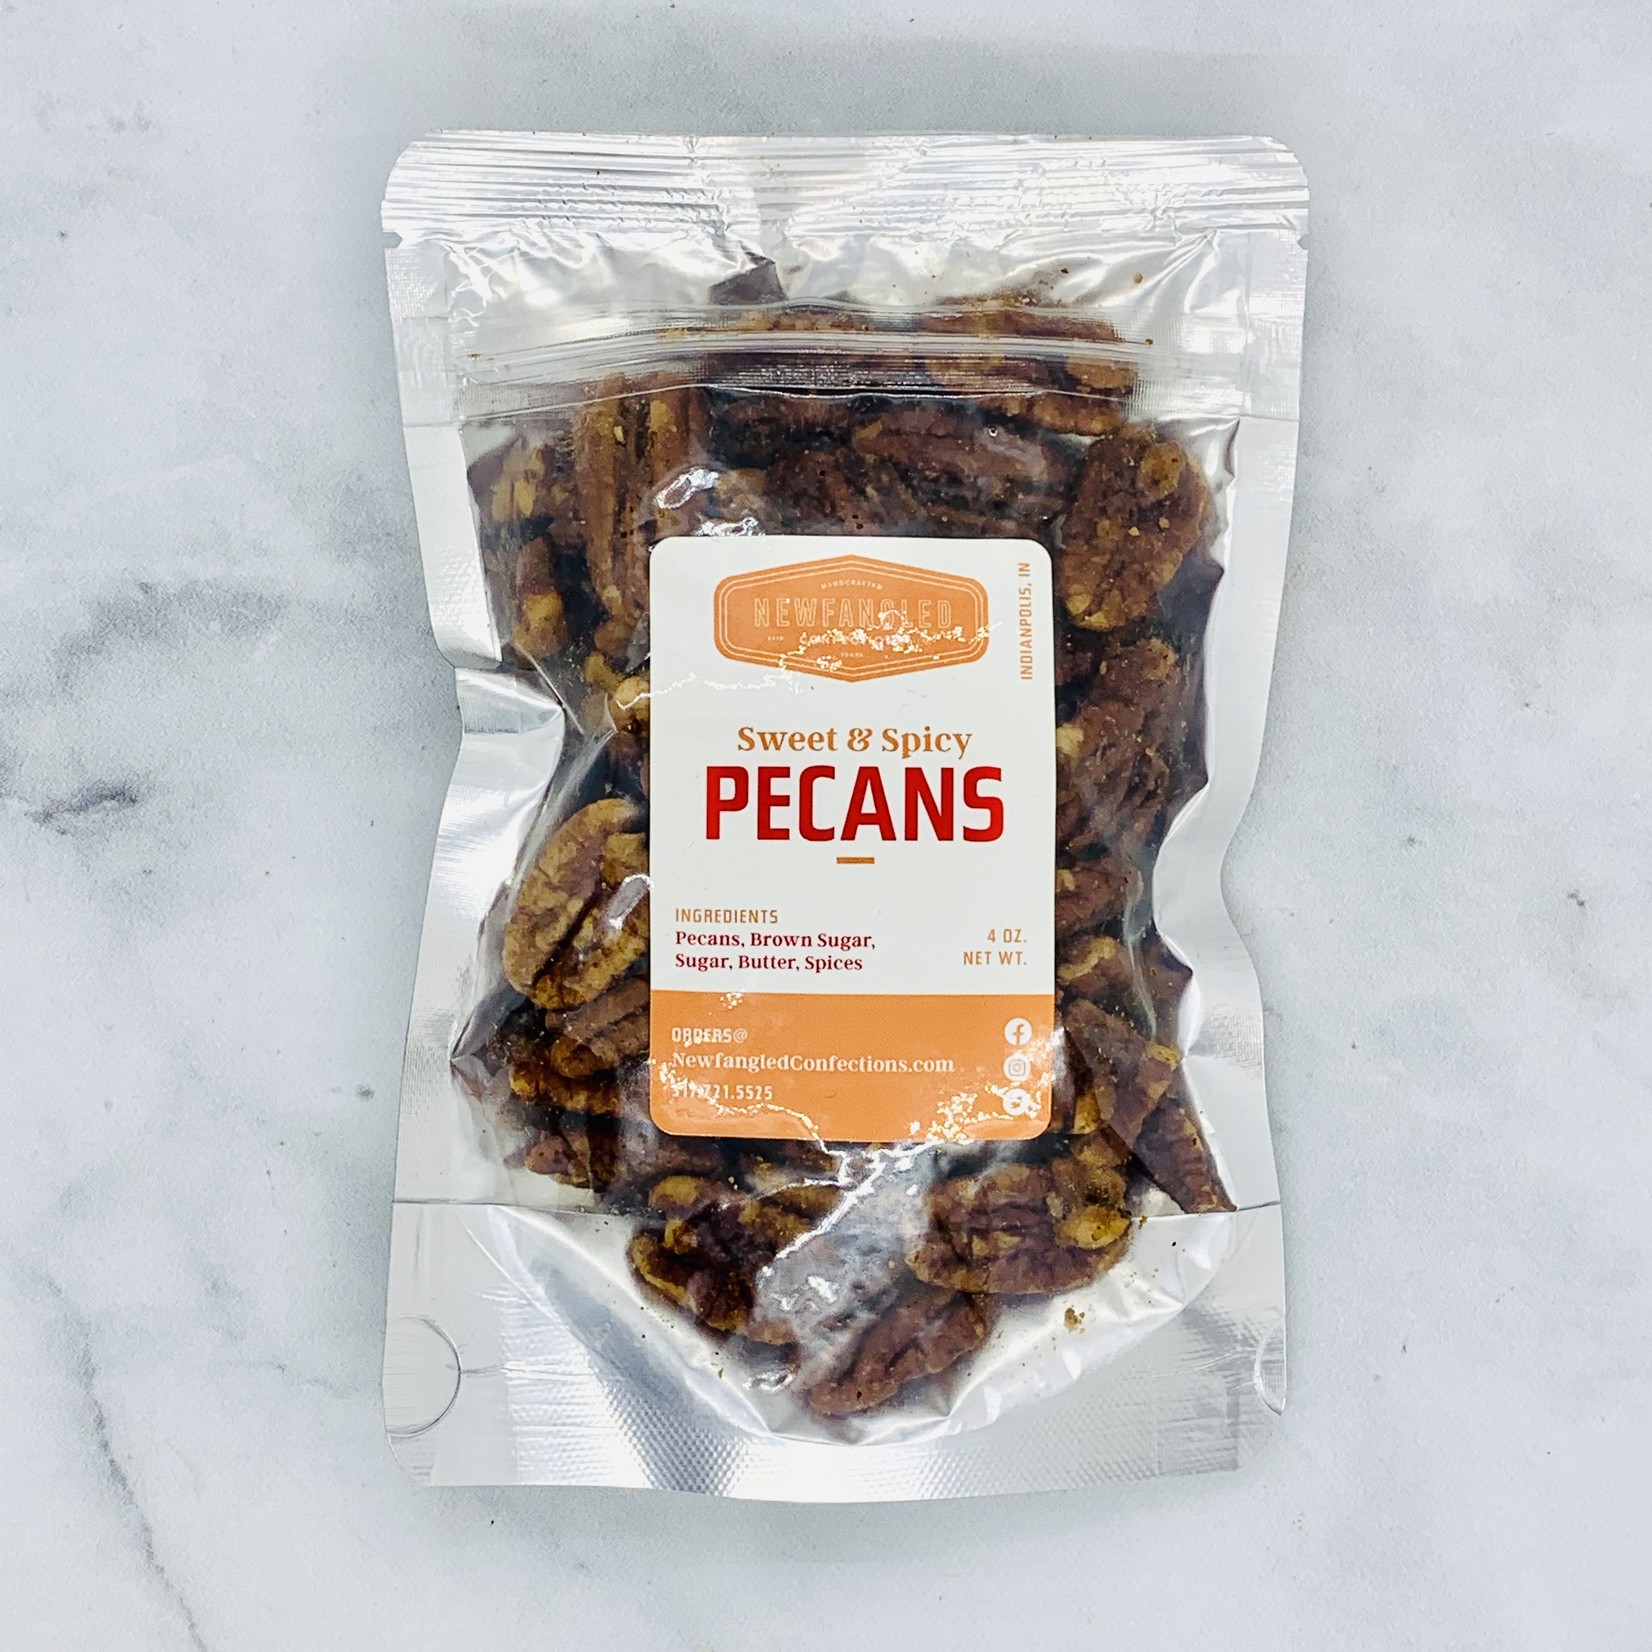 4oz Bag of Sweet & Spicy Pecans by Newfangled Confections